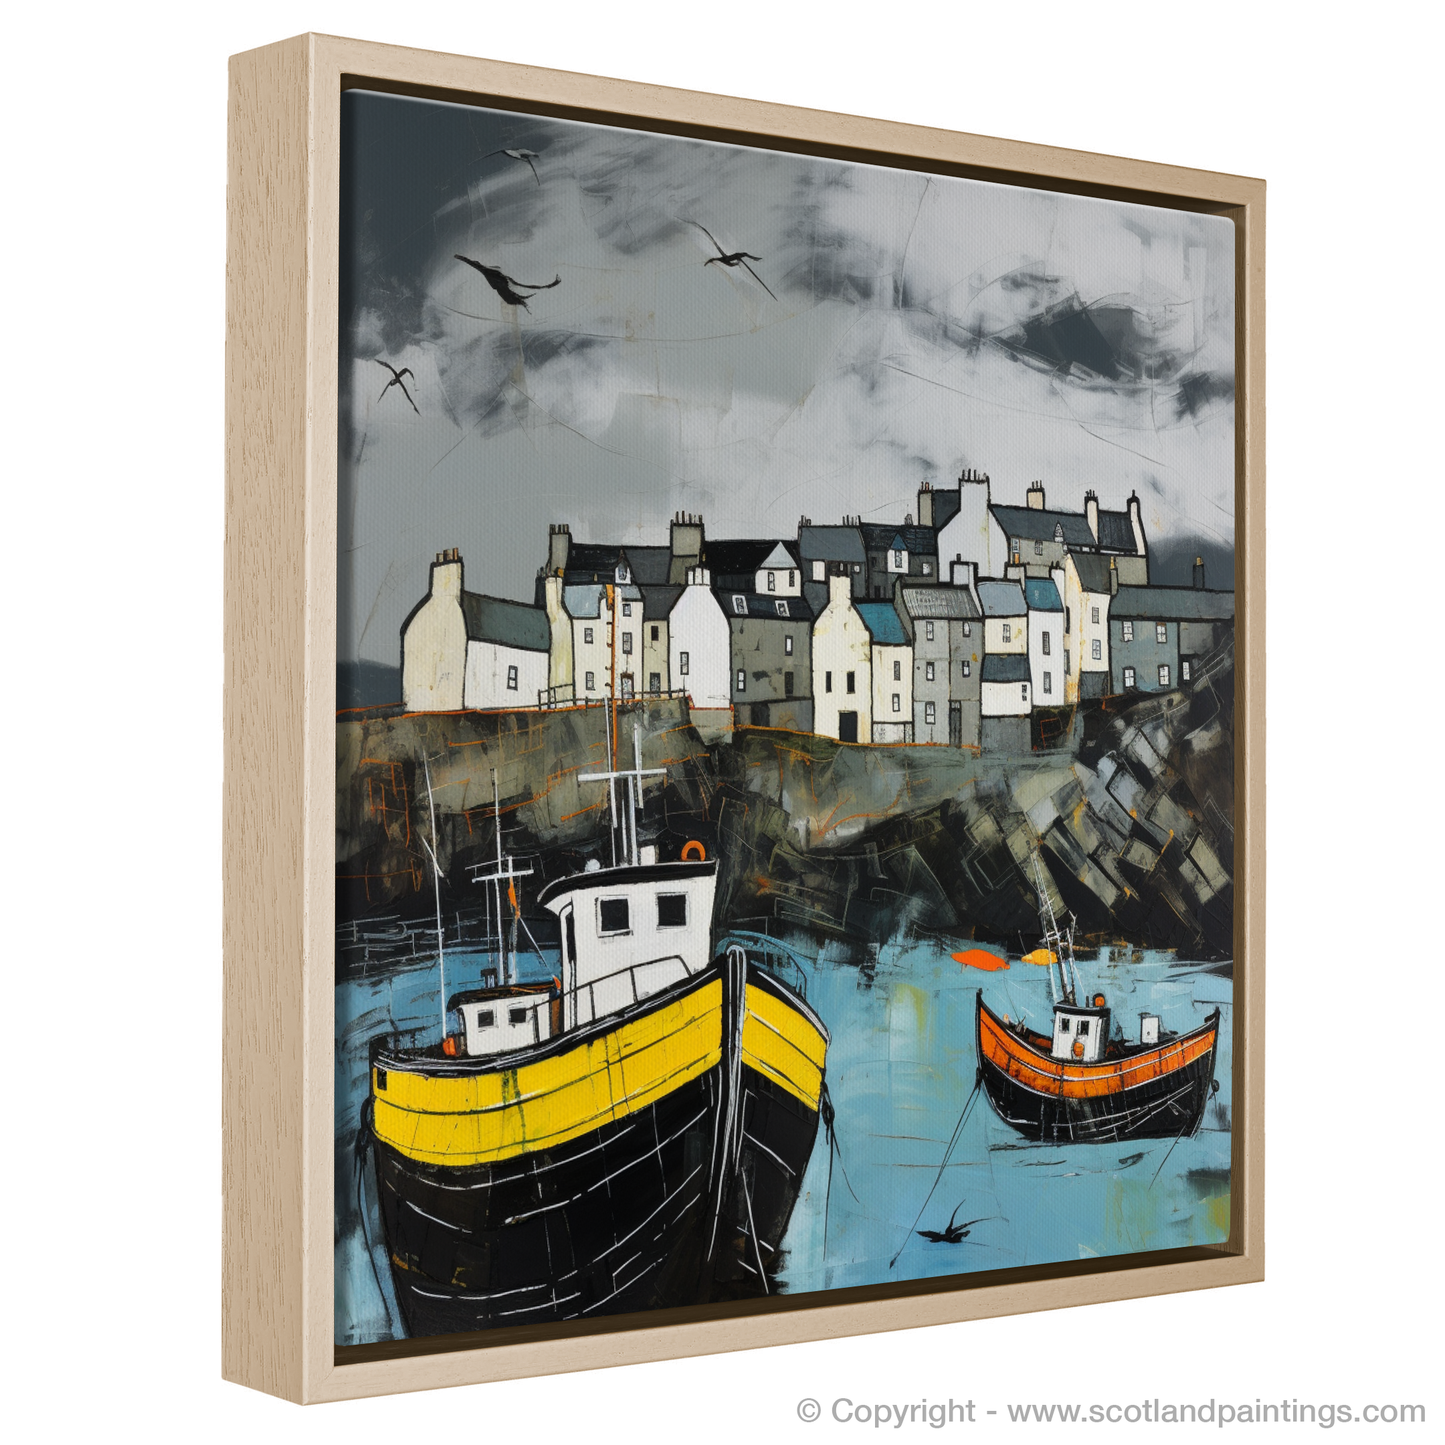 Painting and Art Print of Portsoy Harbour with a stormy sky entitled "Stormy Embrace at Portsoy Harbour".